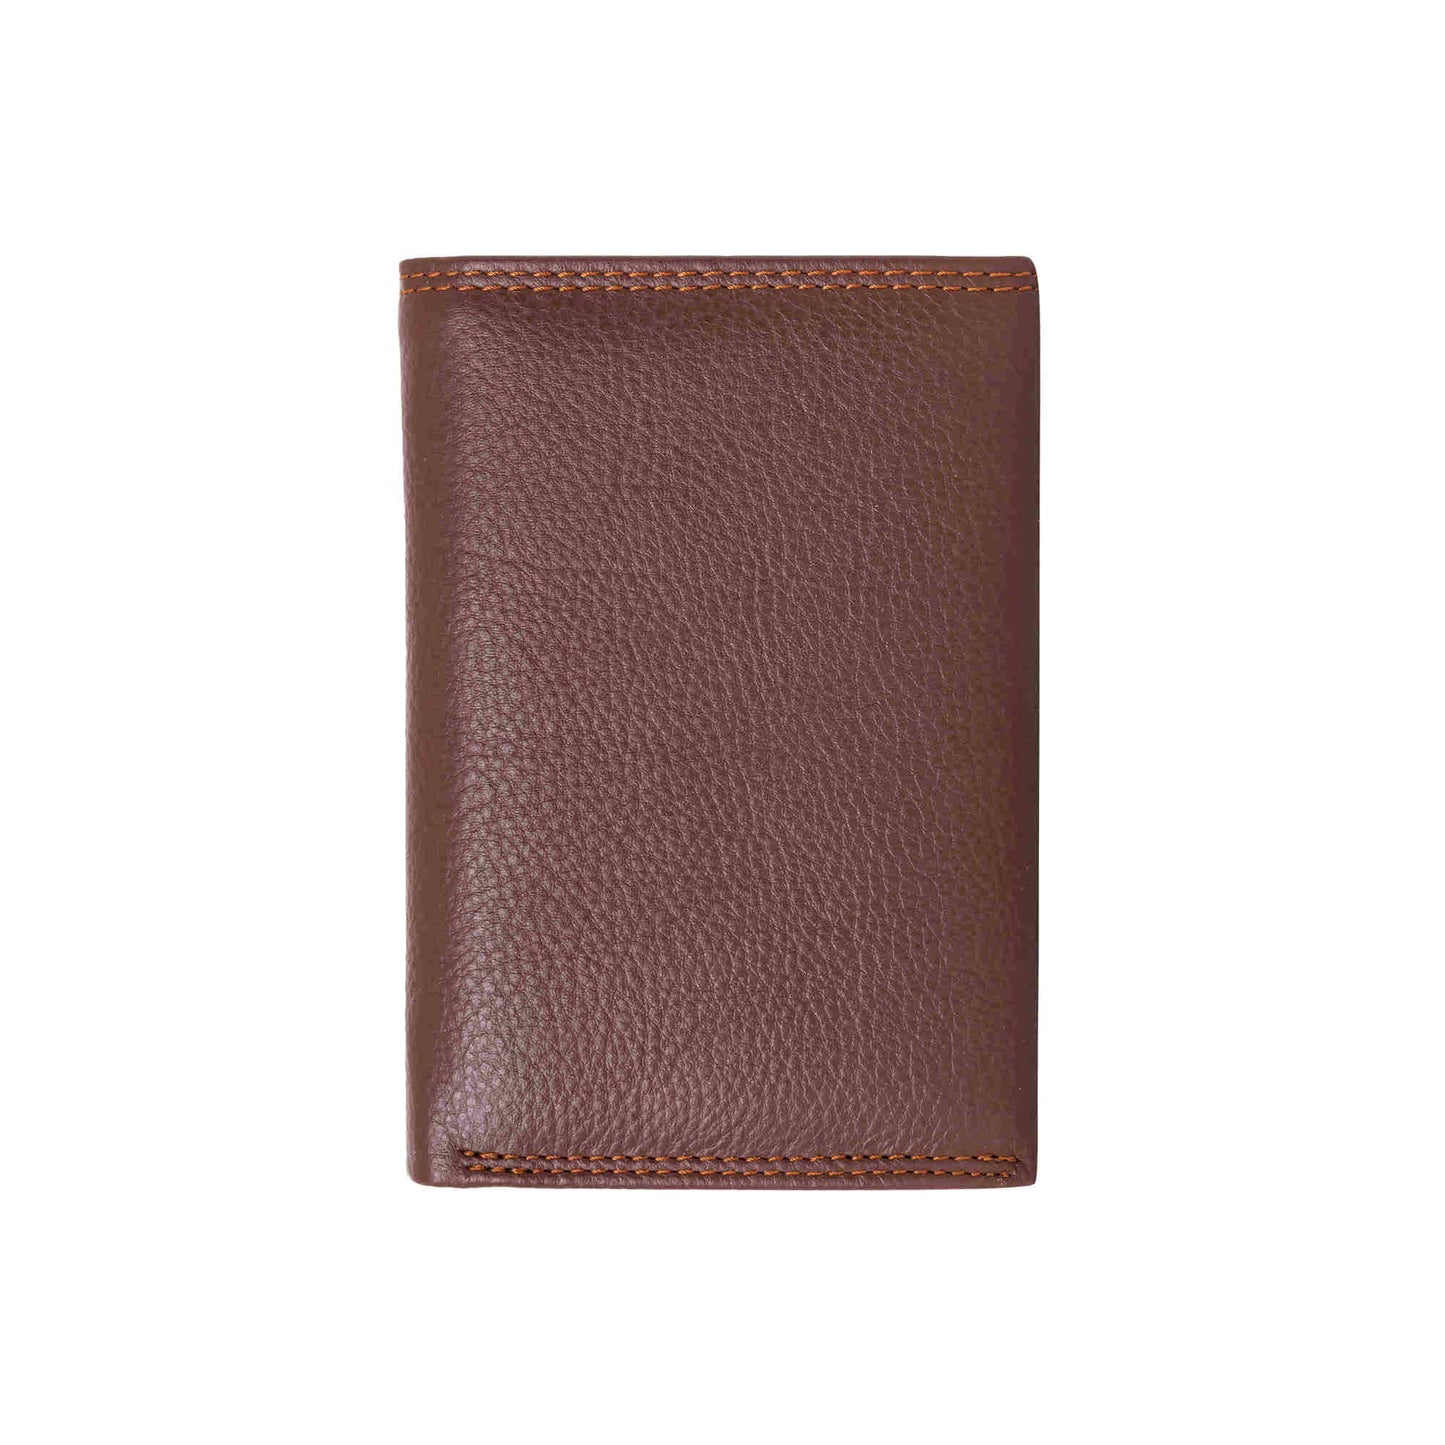 Style n Craft 391109 Ladies Trifold Brown Leather Wallet with Snap Button Closure - Back View Closed